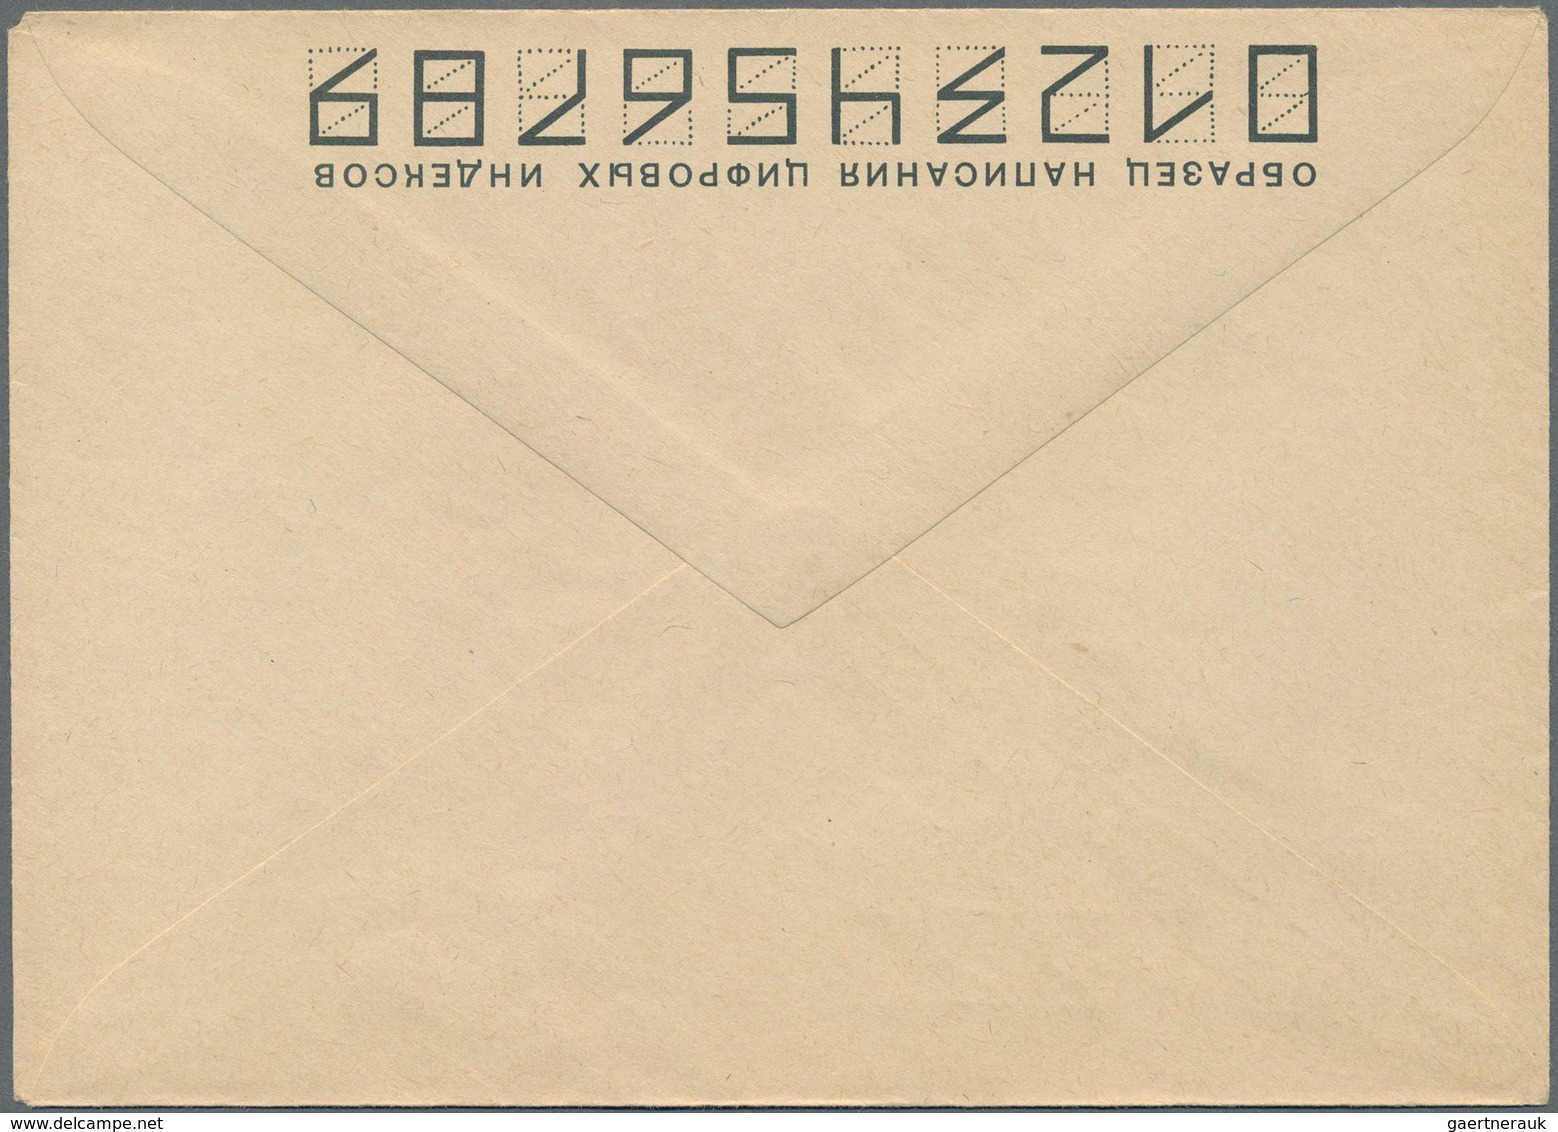 Sowjetunion - Ganzsachen: 1967 Stationery Postal Stationery Enveloppe U 760 Type 2 Cover To Study Th - Unclassified